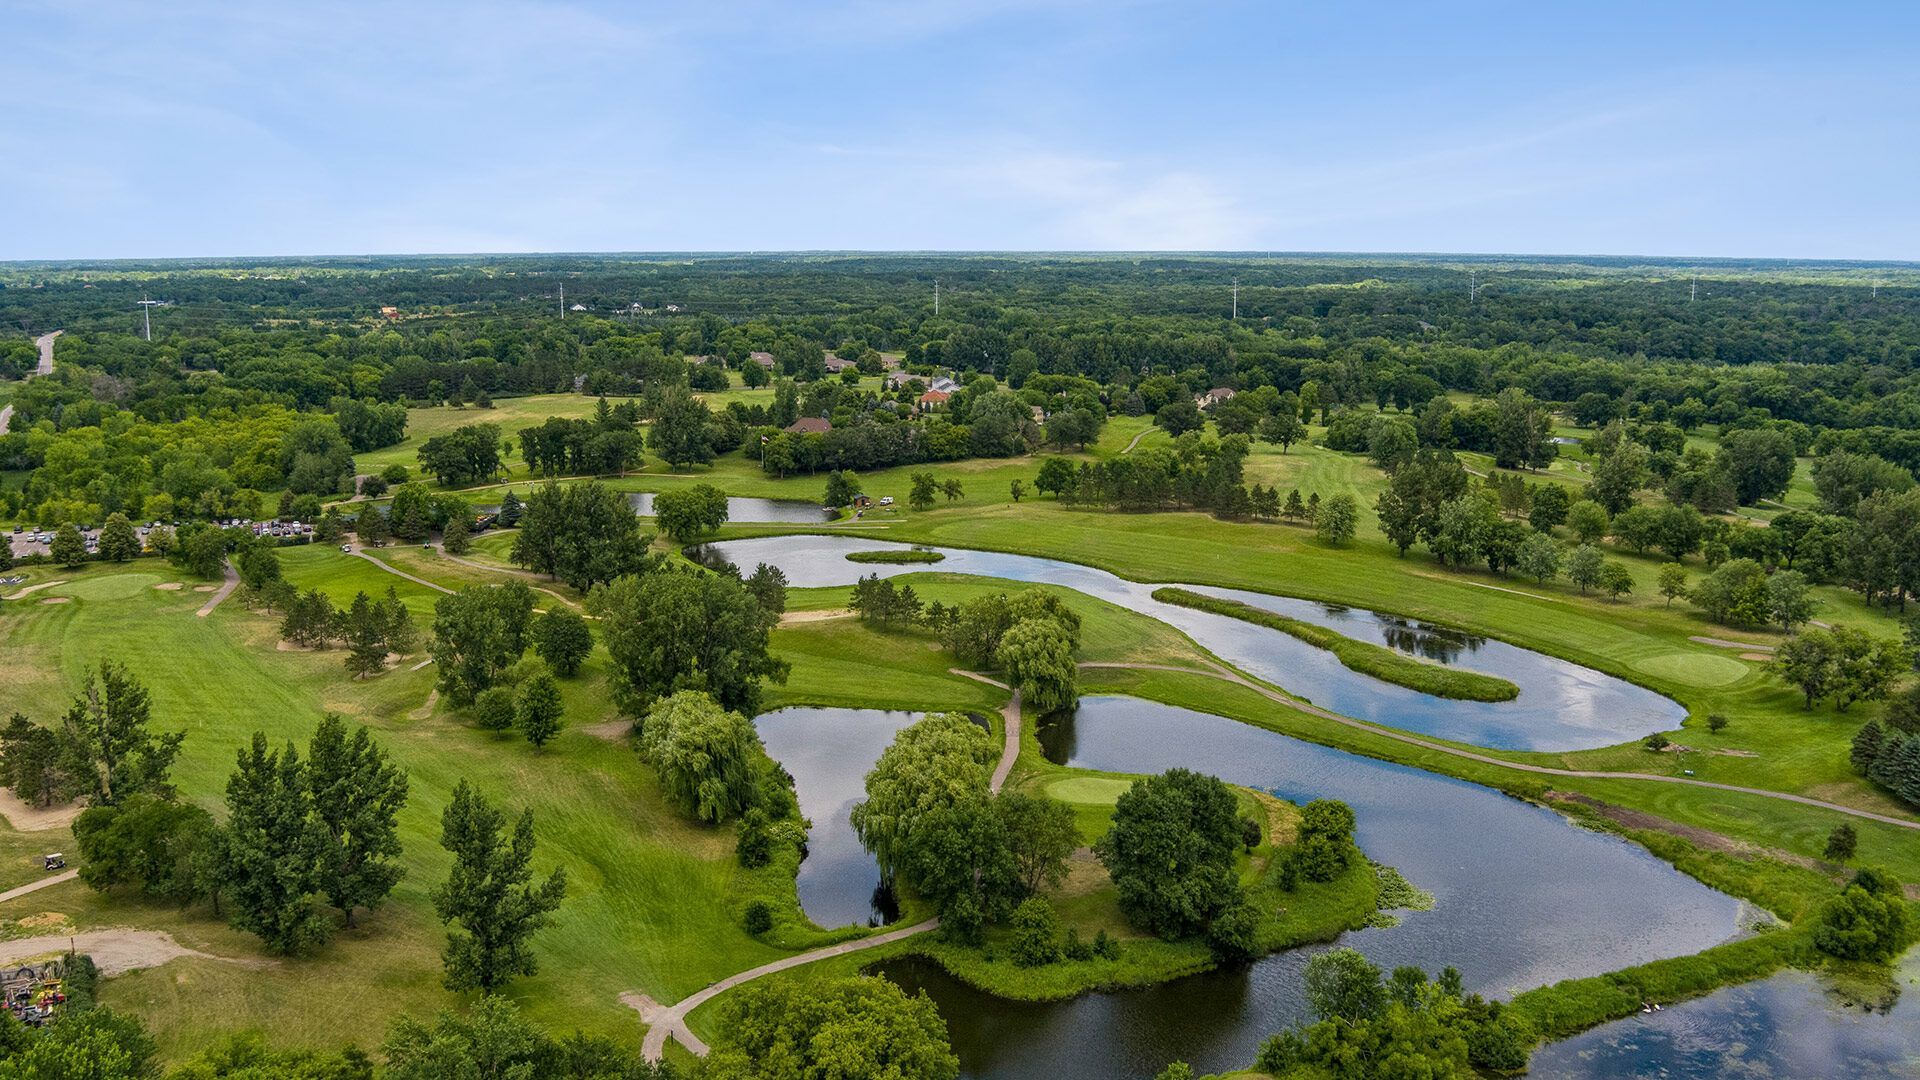 An aerial view of a golf course surrounded by trees and water.